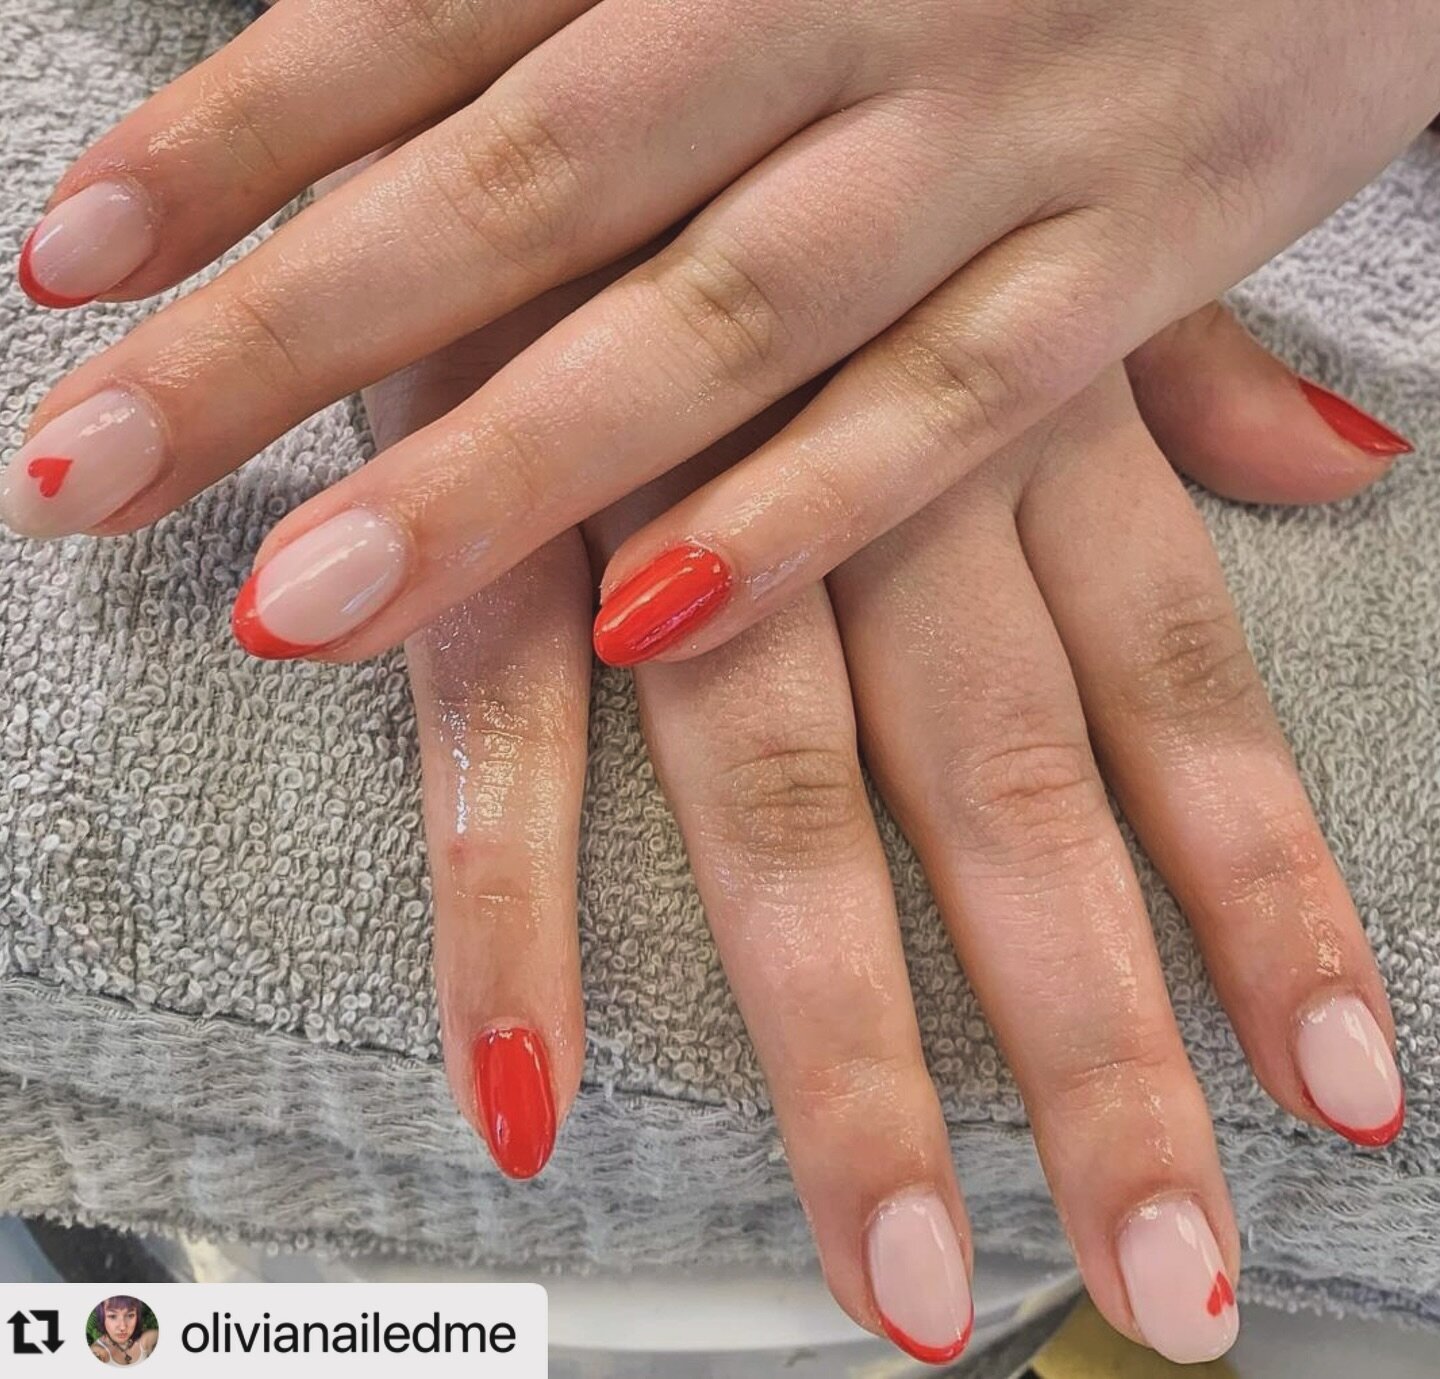 #Repost @olivianailedme with @use.repost
・・・
im living for all the Valentines day nails!!! gel manicure with level 1 art mwah mwah💋💌 @the_gelbottle_inc 

#seattle #seattleartist #seattlenailtech #nails #pnw #pnwnails #pdx #pdxnails #nailinspo #nail